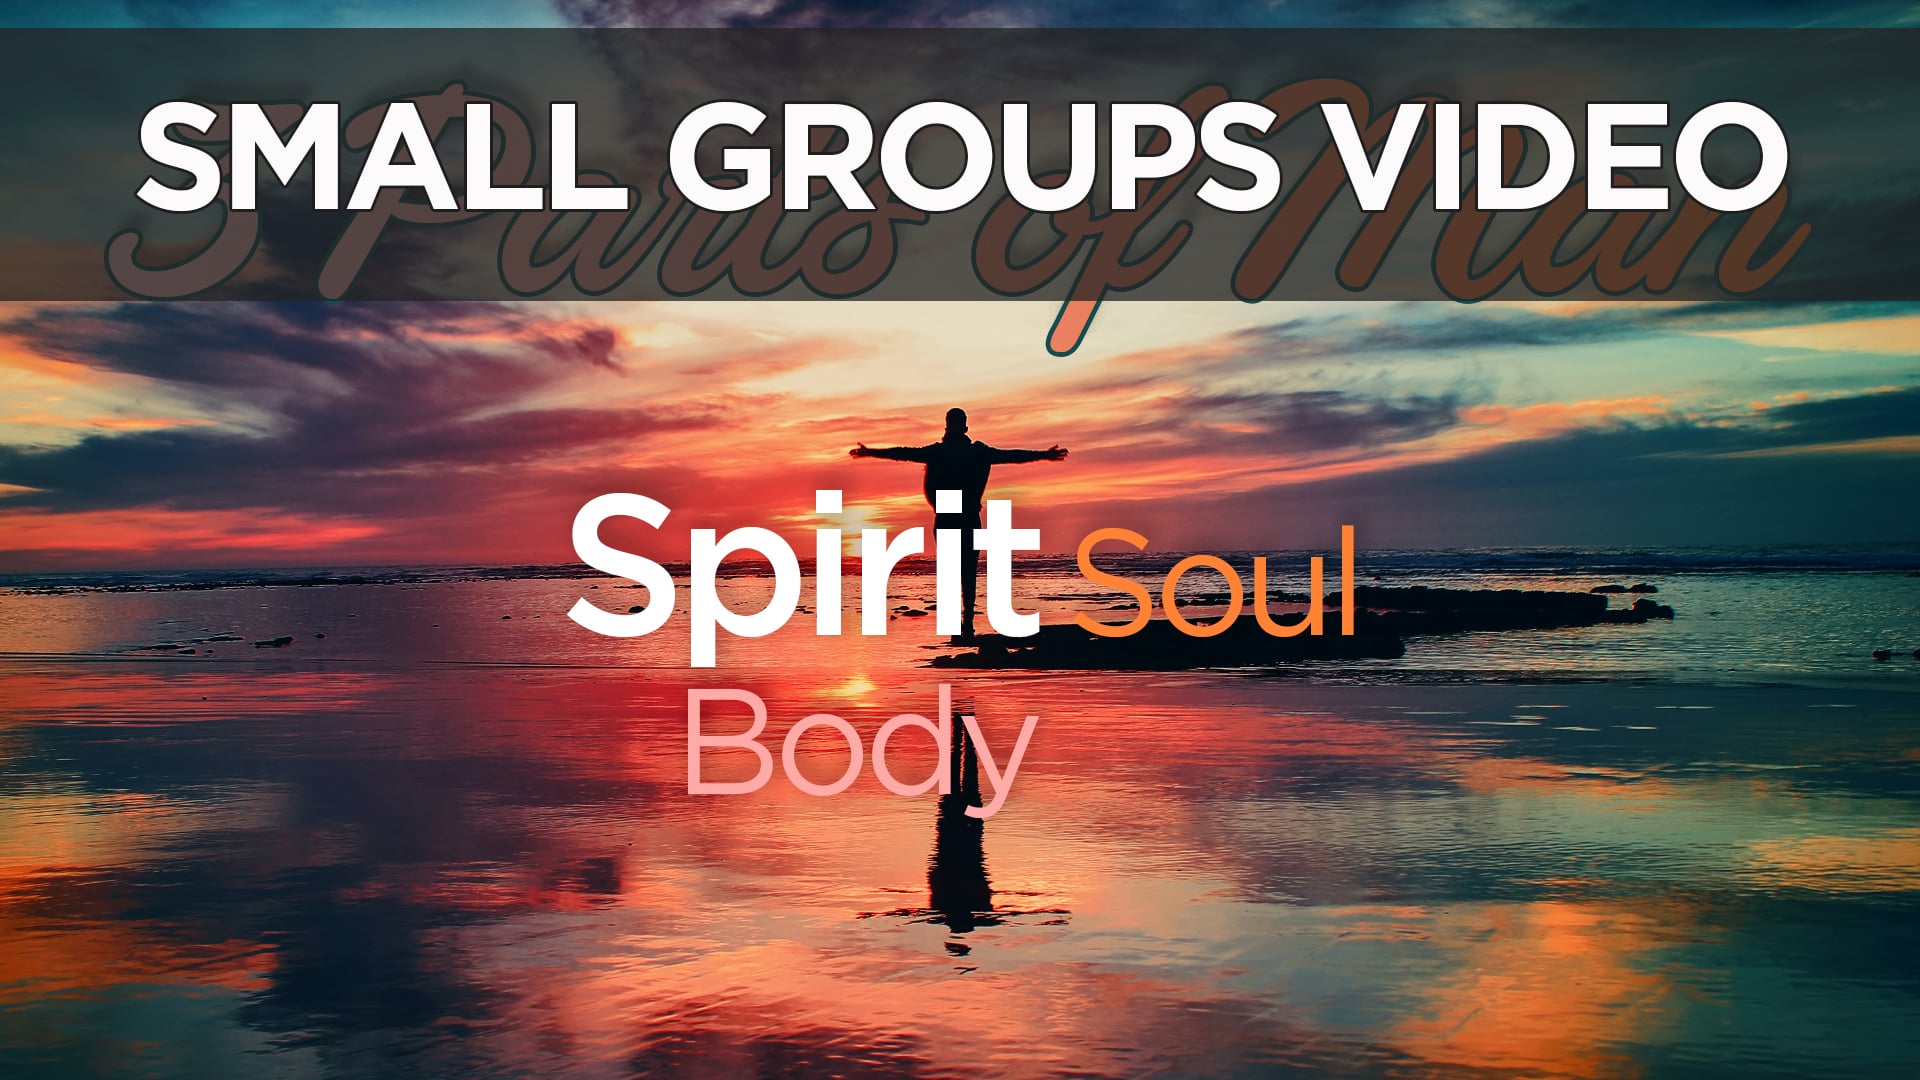 Small Groups Video - 6 Weeks of Body Soul, Spirit - Session 4